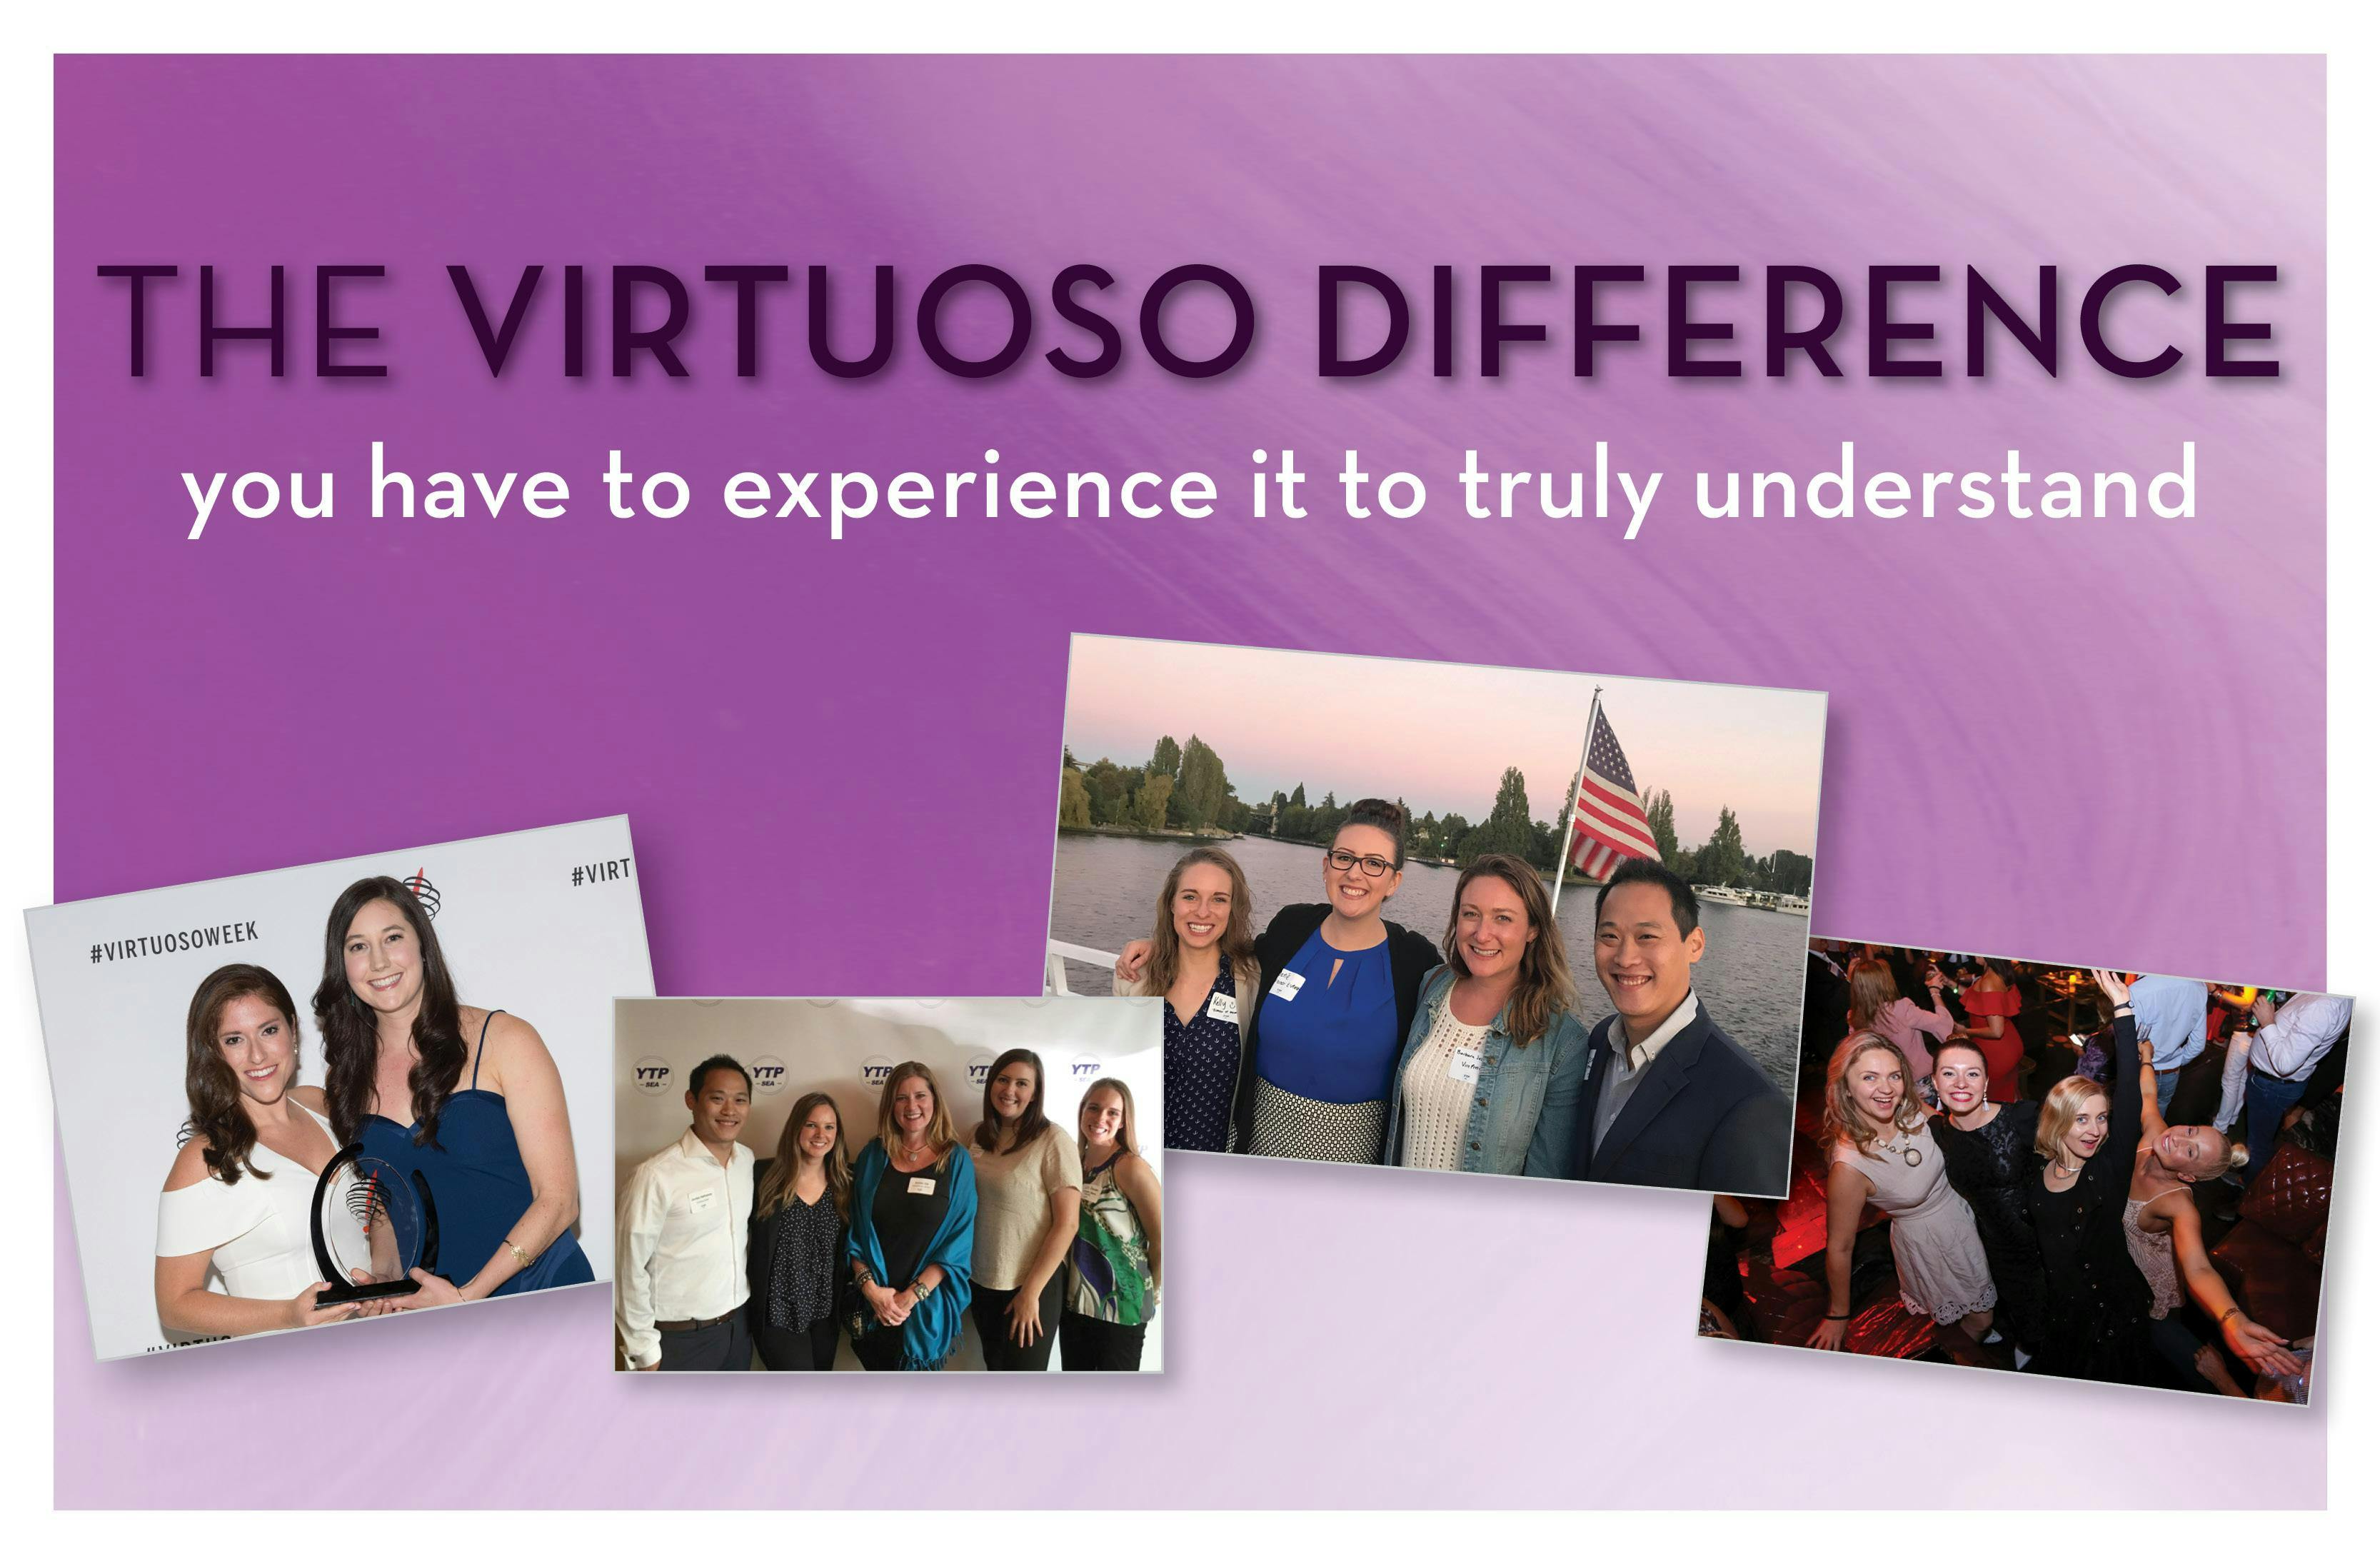 Learn about Travel Advising with YTP and Virtuoso